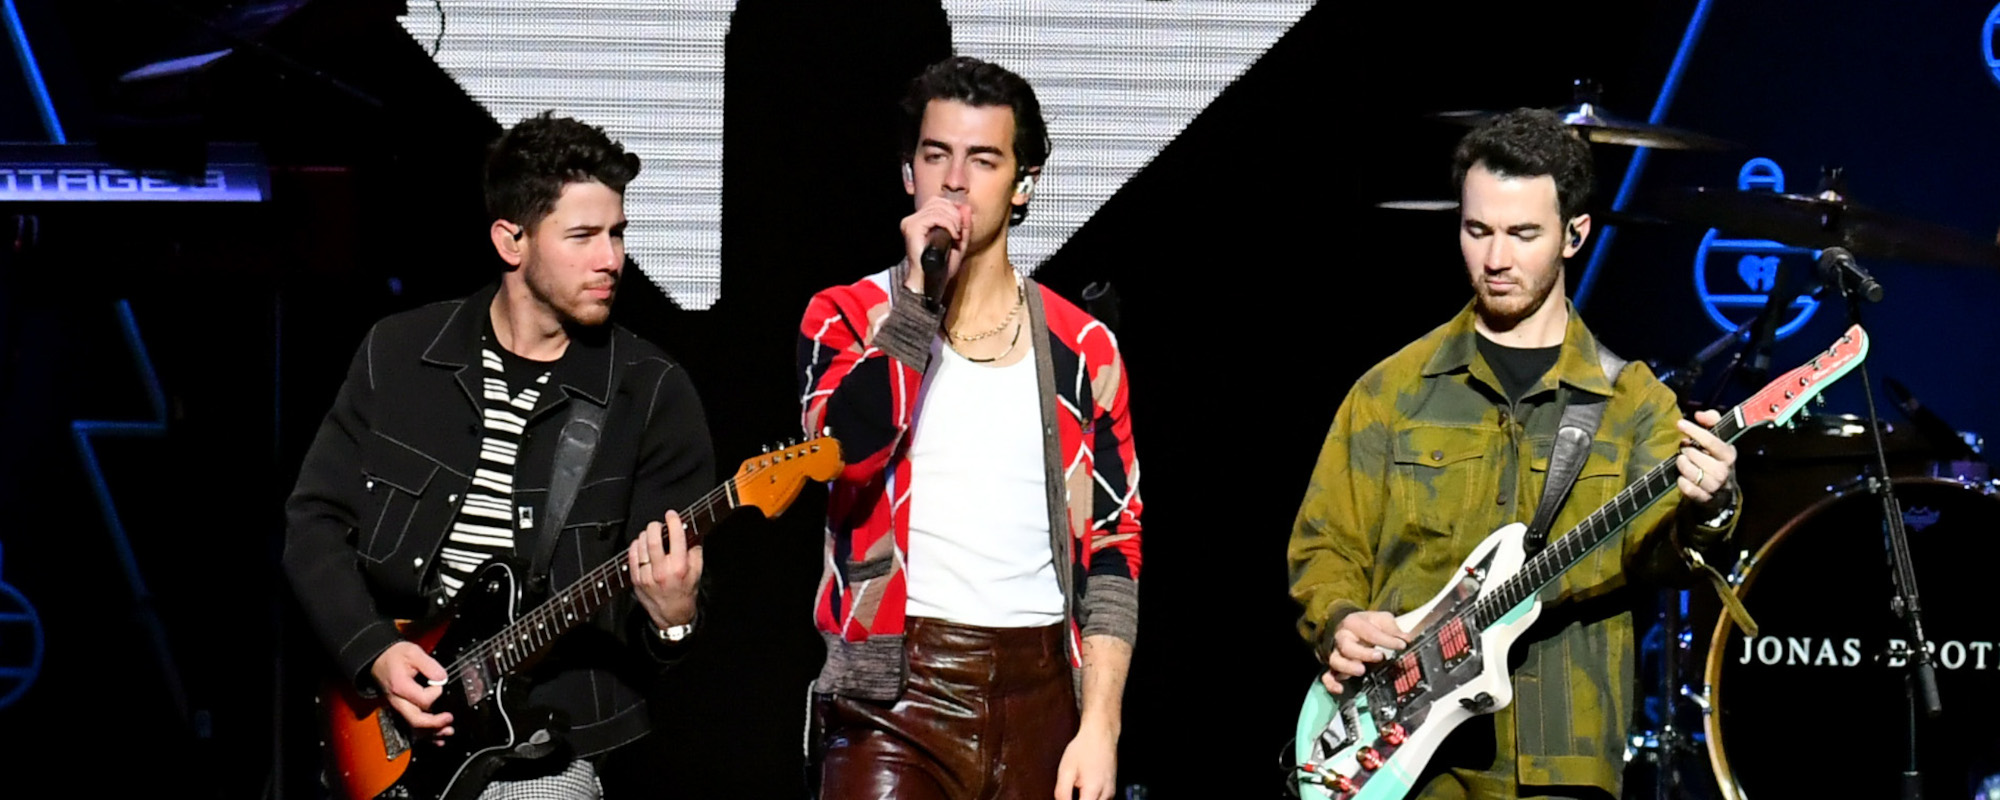 The Meaning Behind The Jonas Brothers’ Reunion Jam “Sucker”